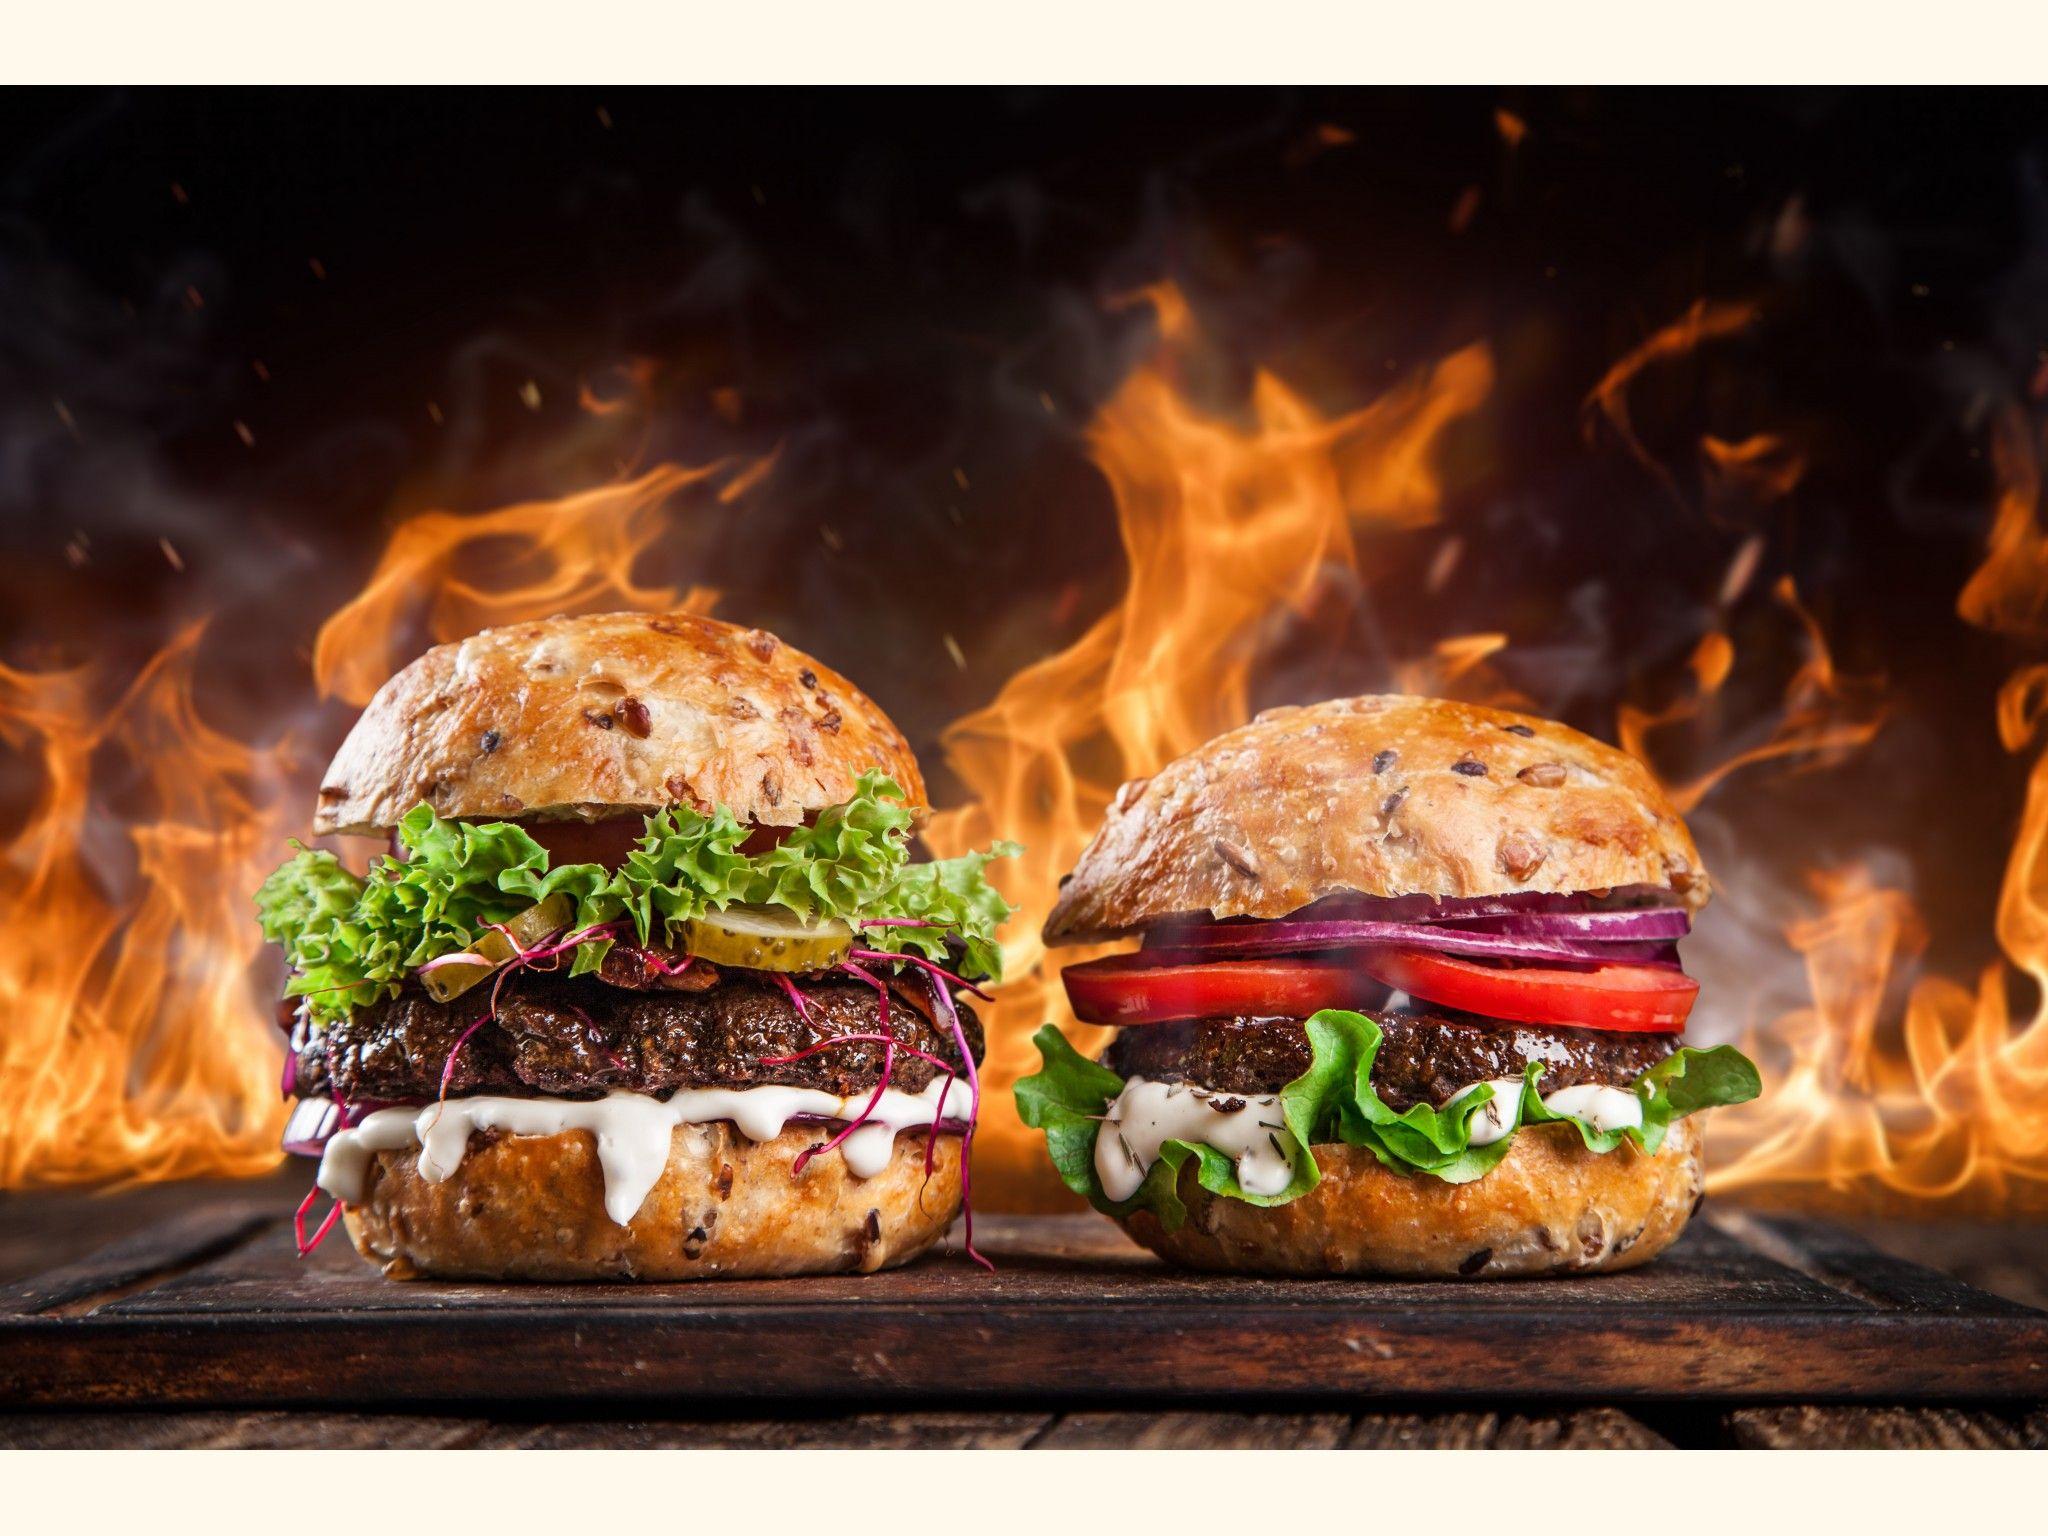 Hot & Spicy Burger Complete Mix. Food, Food photography